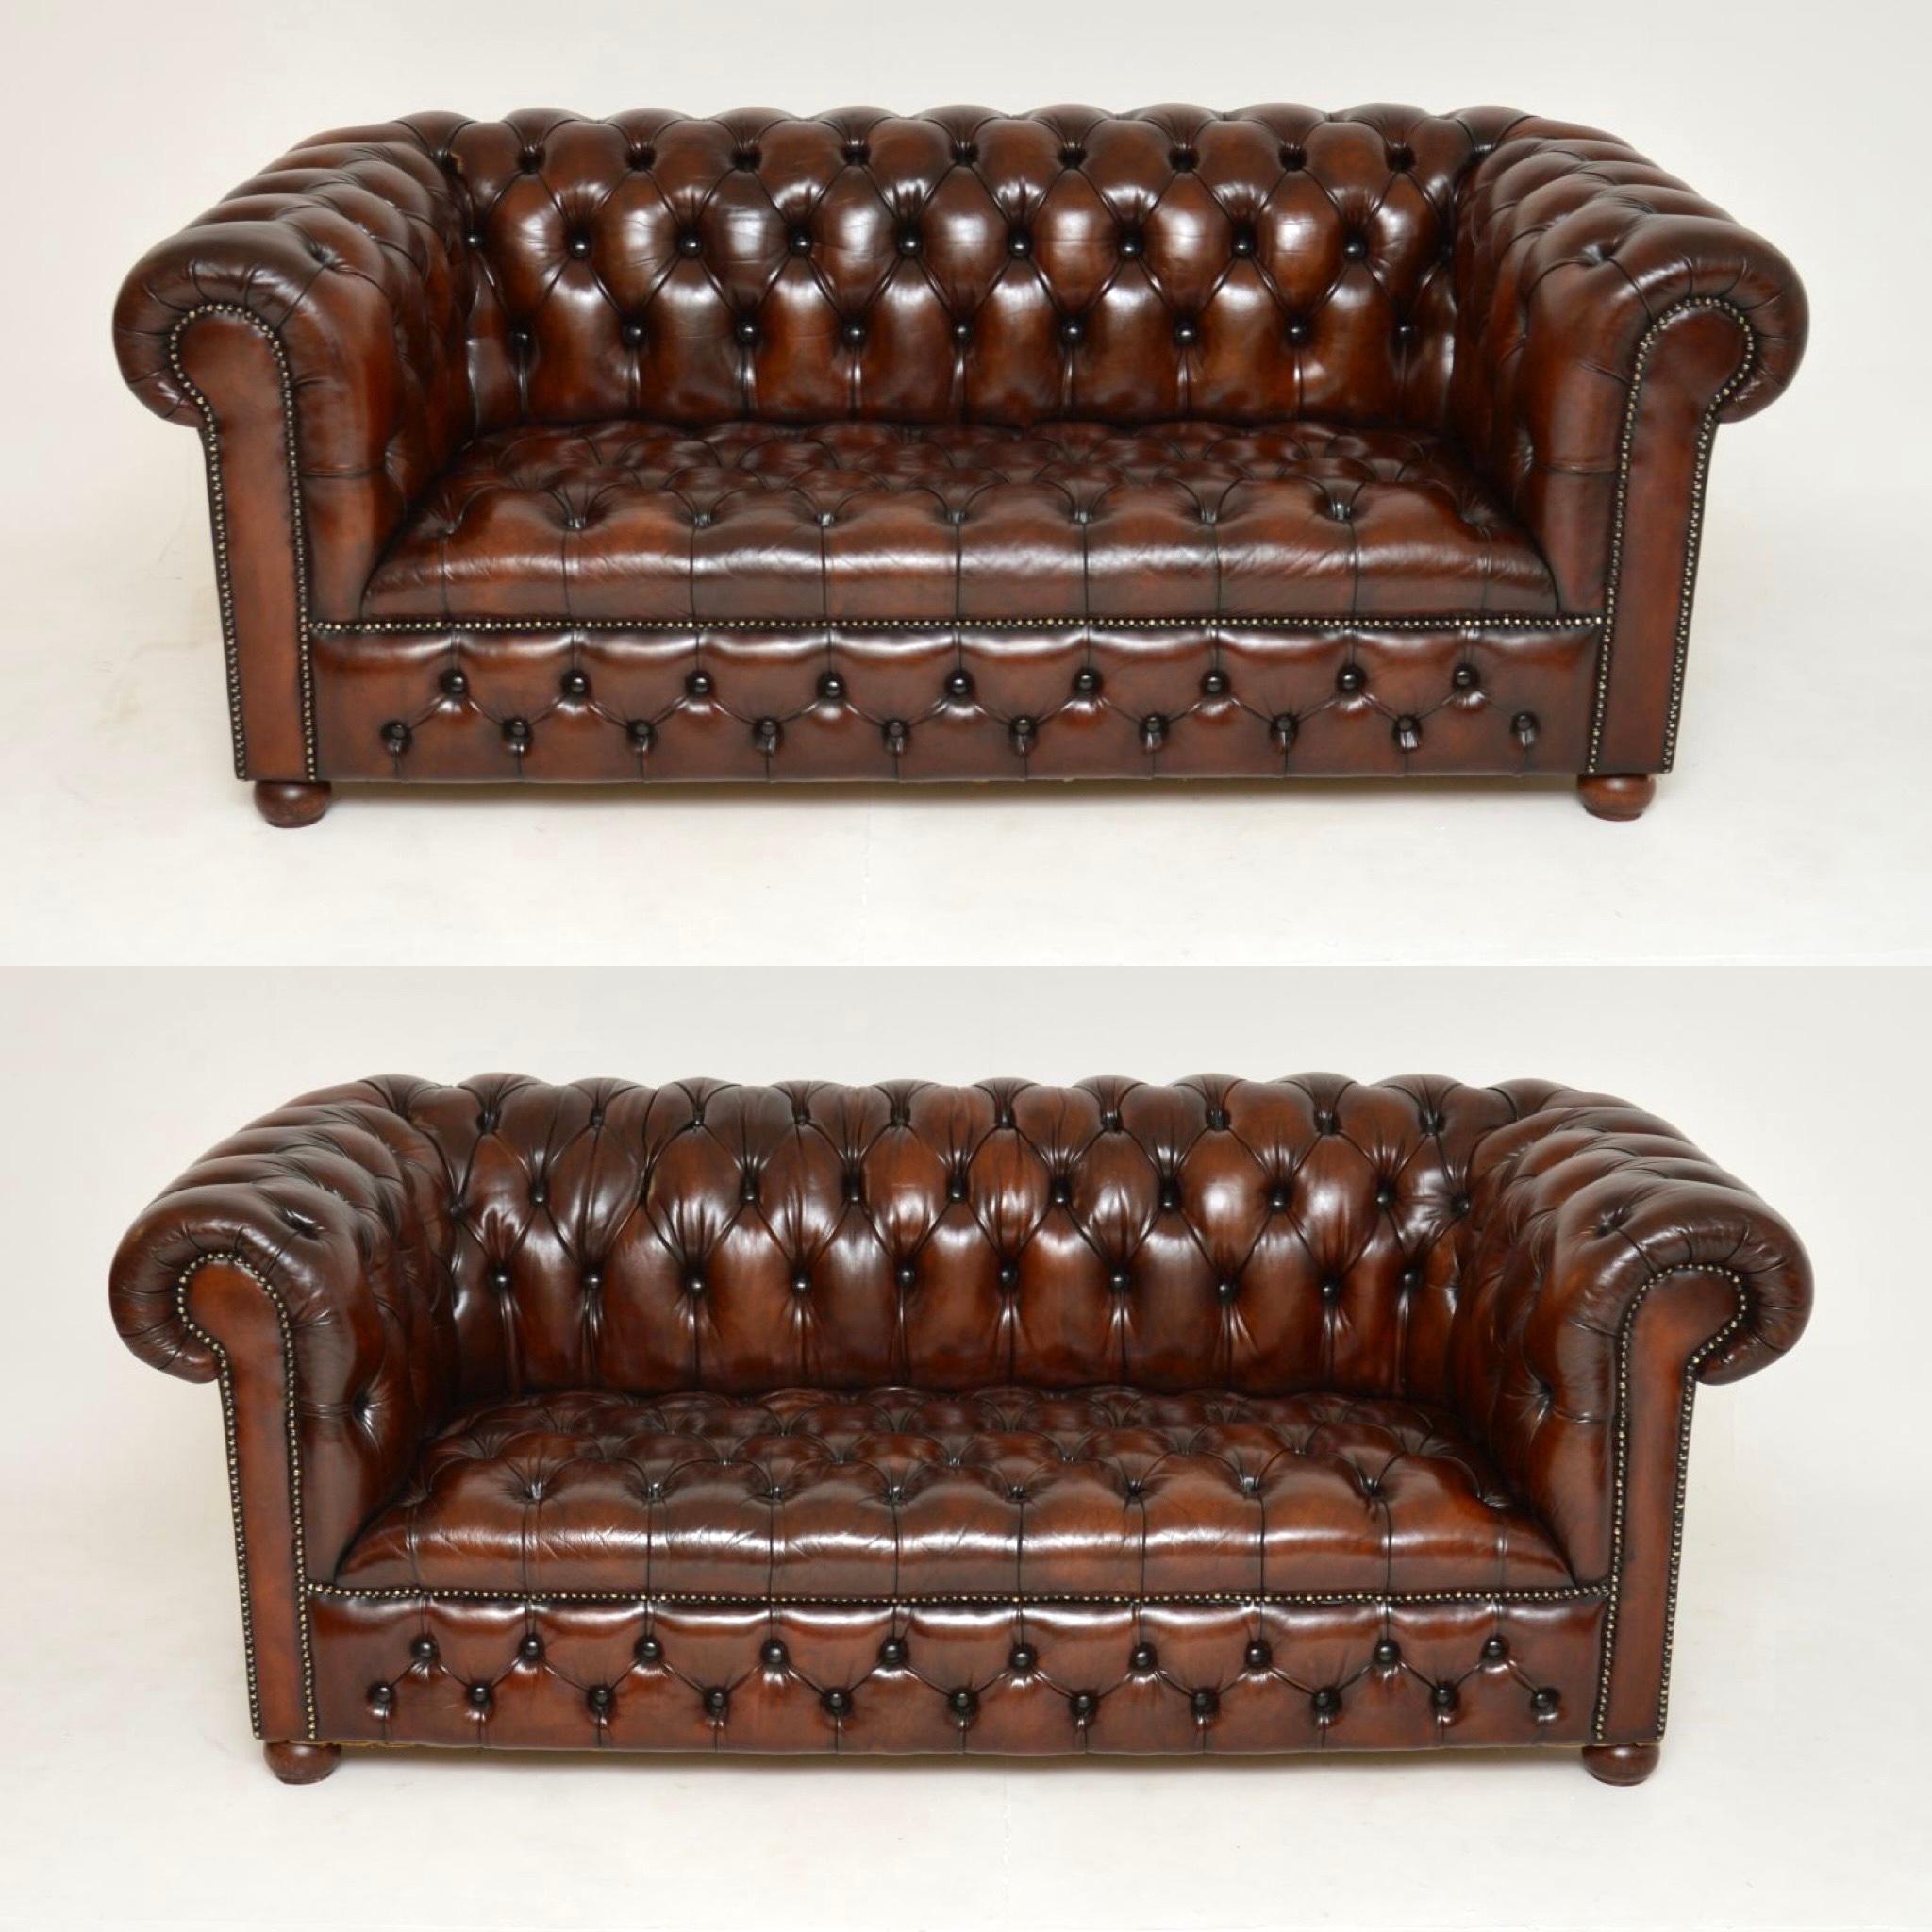 A fantastic pair of antique deep buttoned leather Chesterfield sofas. They were made in England, and date from around the 1950’s.

It is very rare to find a matching pair, they were handmade so there is a very tiny size difference of around one